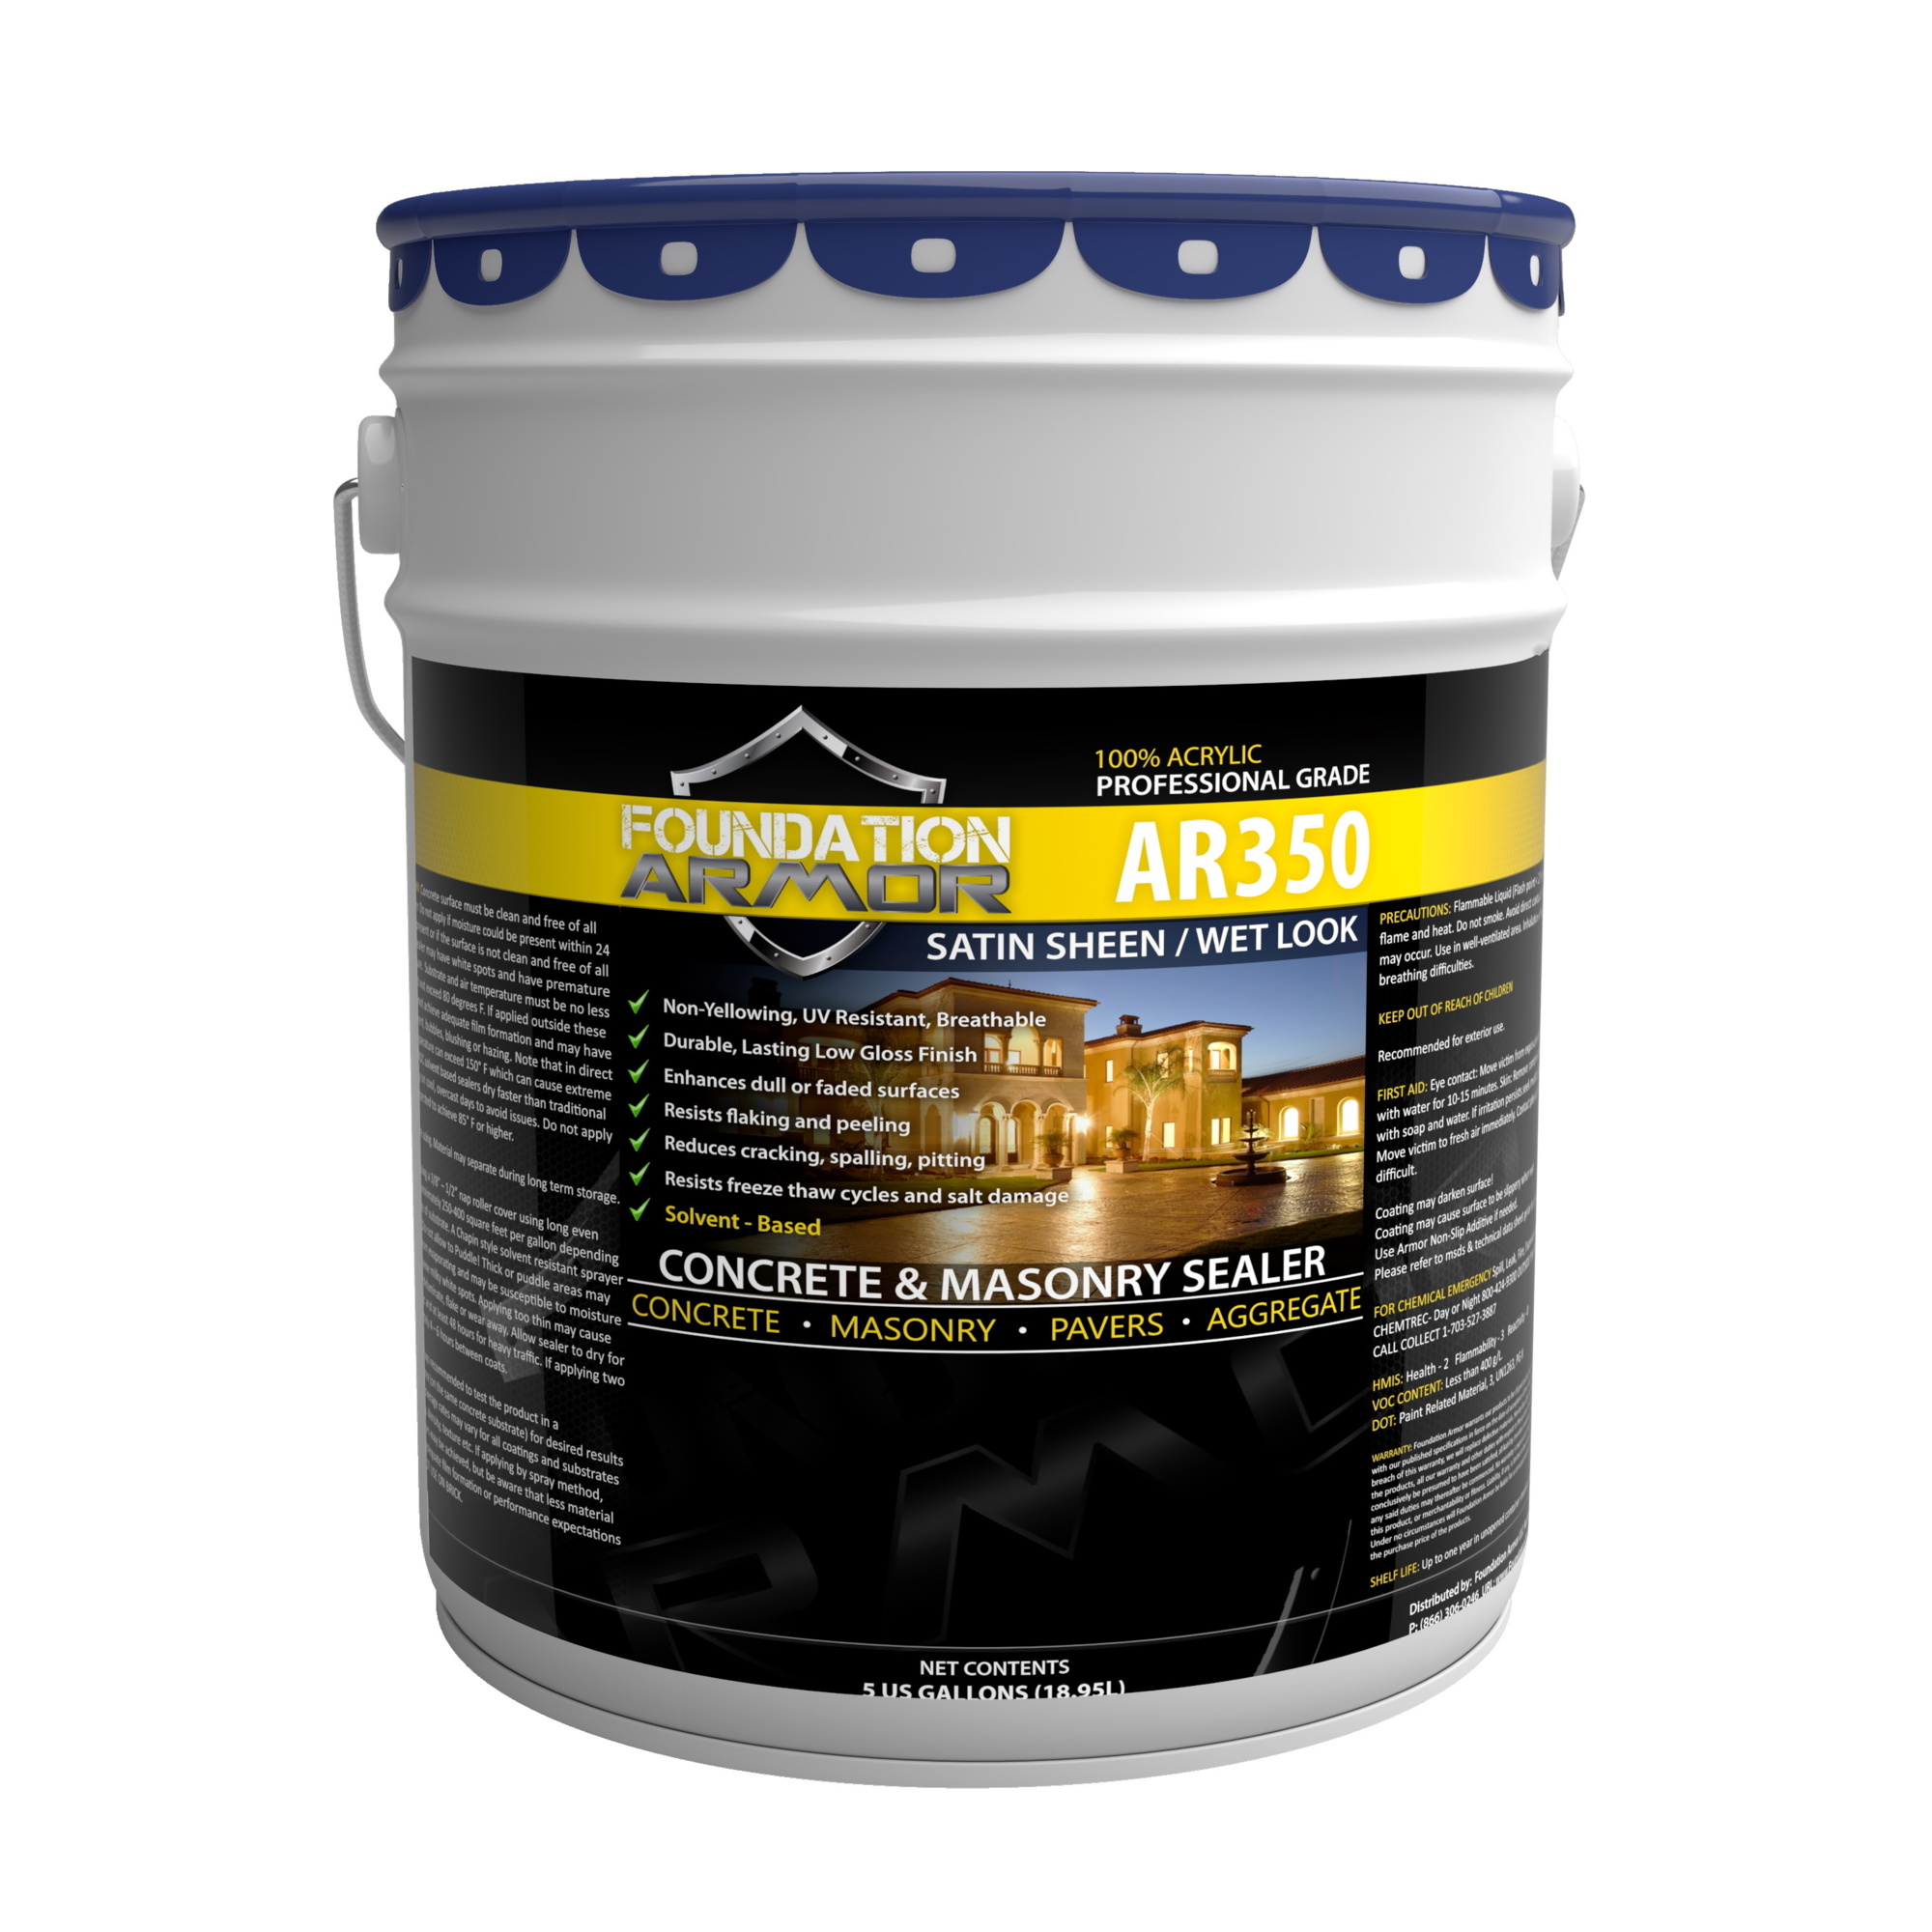 Foundation Armor, Low Gloss Wet Look Concrete and Paver Sealer, Container Size 5 Gallon, Color Clear, Application Method Sprayer or Roller, Model